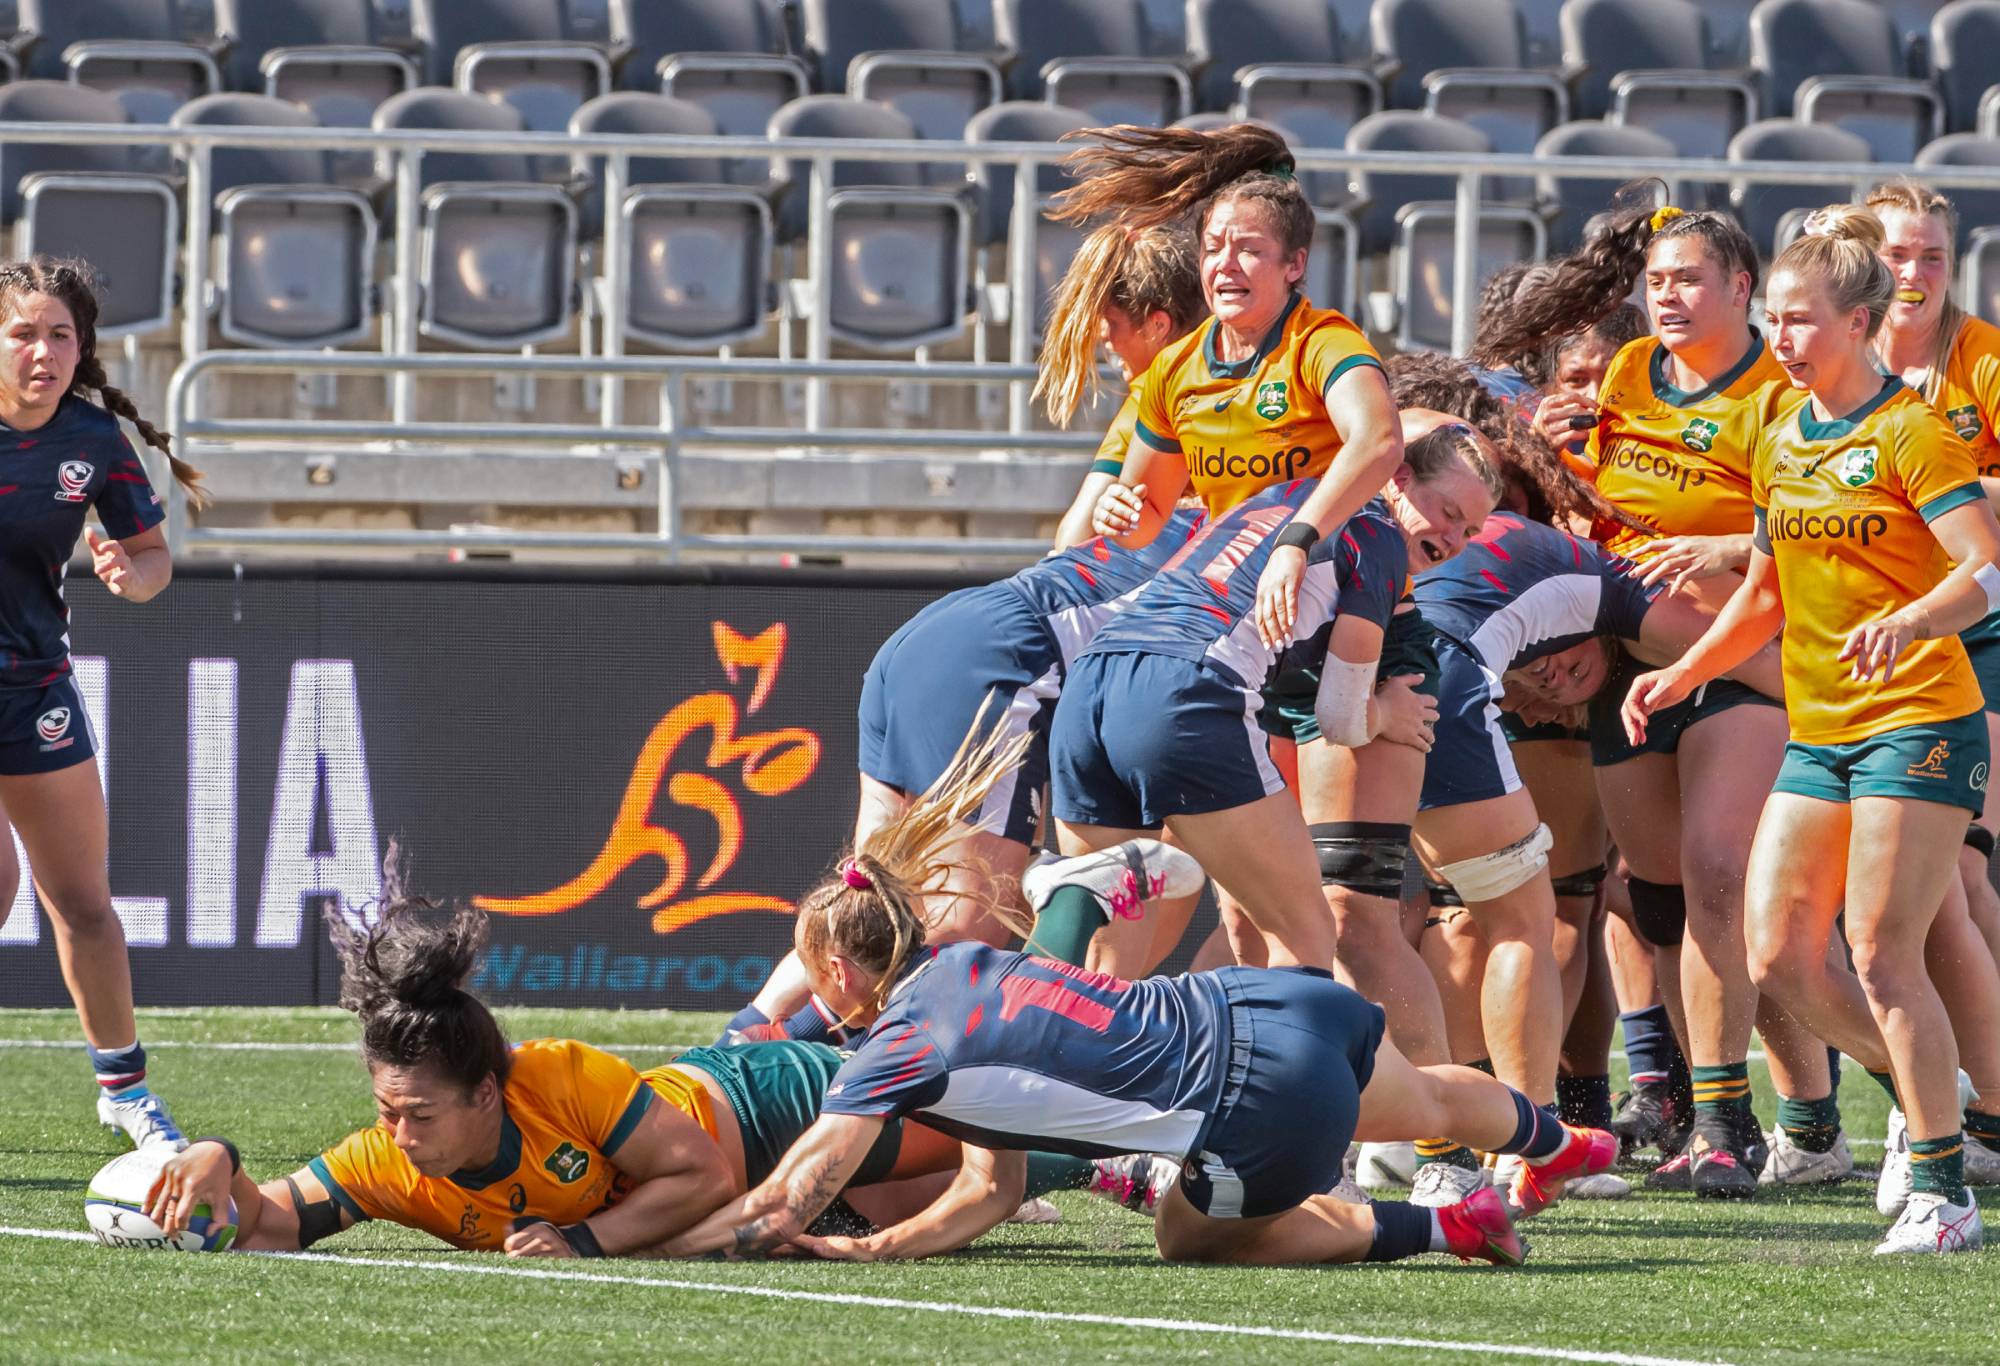 Eva Karpani of the Australia Wallaroos scores a try against U.S during the first half of a game of the World Rugby Pacific Four Series at TD Place Stadium on July 8, 2023 in Ottawa, Canada. (Photo by Andrea Cardin - World Rugby/World Rugby via Getty Images)